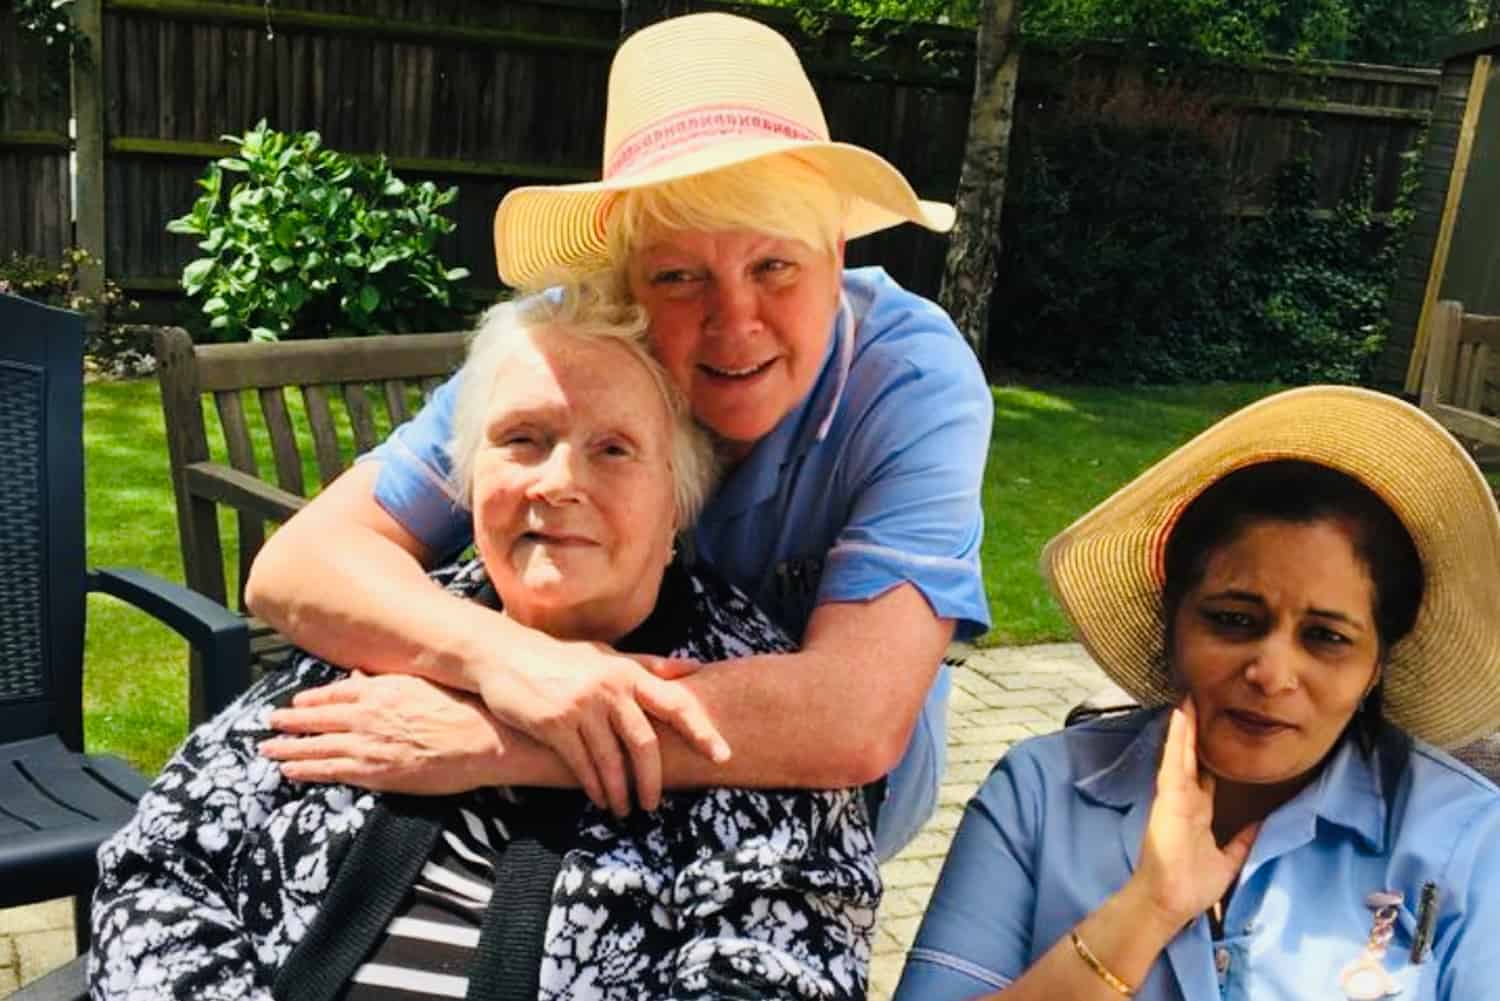 Three residents enjoying a sunny day outdoors, with two of them wearing stylish sun hats and all sharing a warm, cheerful moment together.